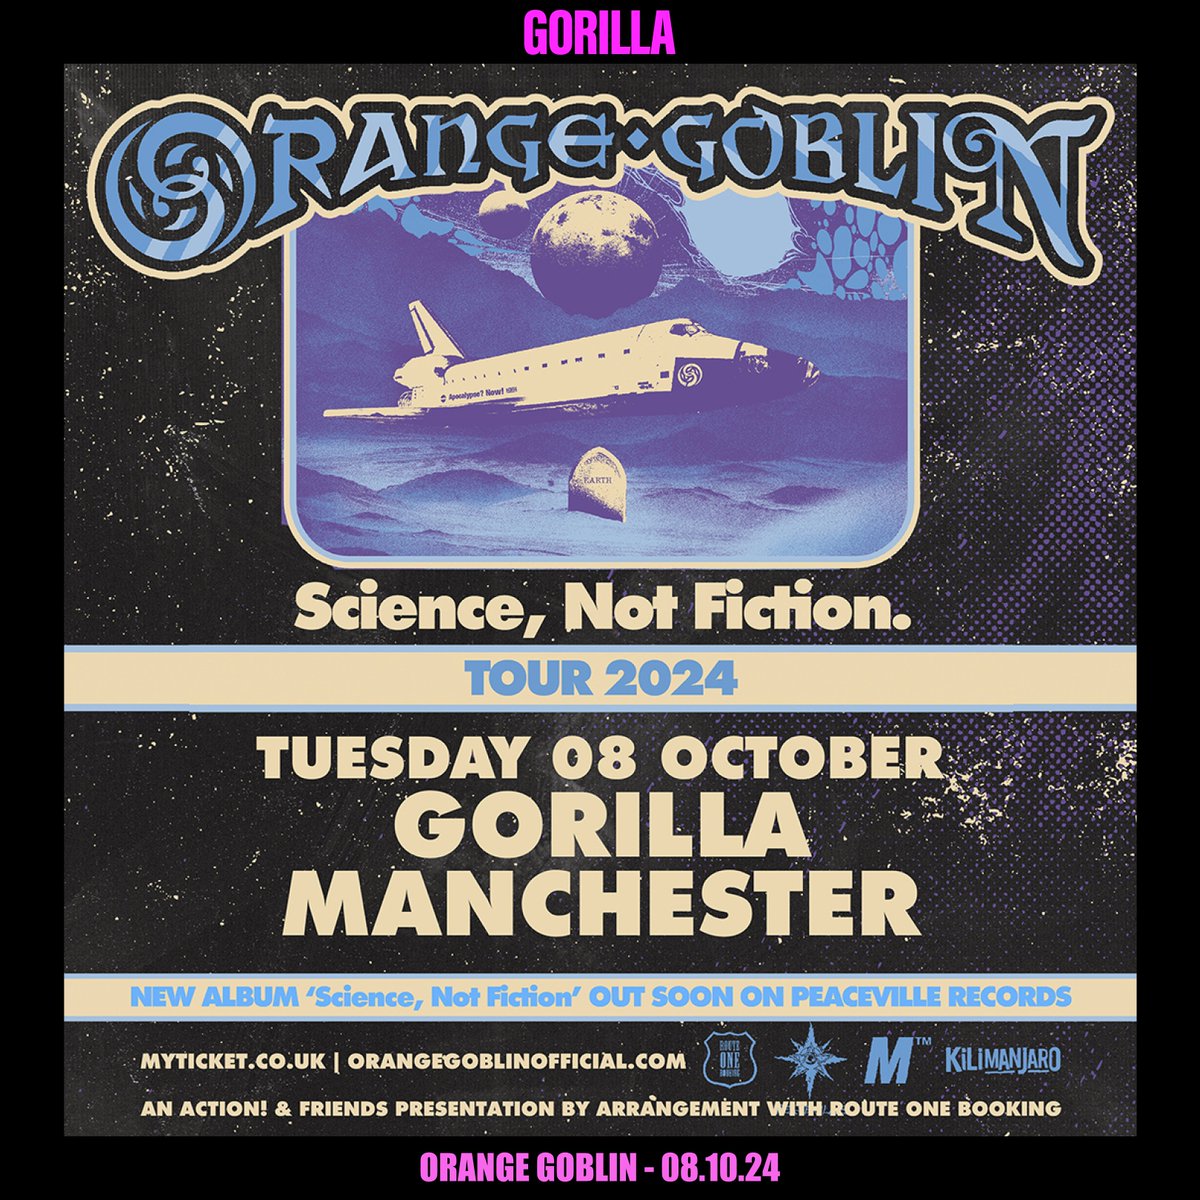 NEW SHOW | Heavy metal band Orange Goblin are set for Gorilla on 8th October. Tickets available next Friday 15th at 10am!